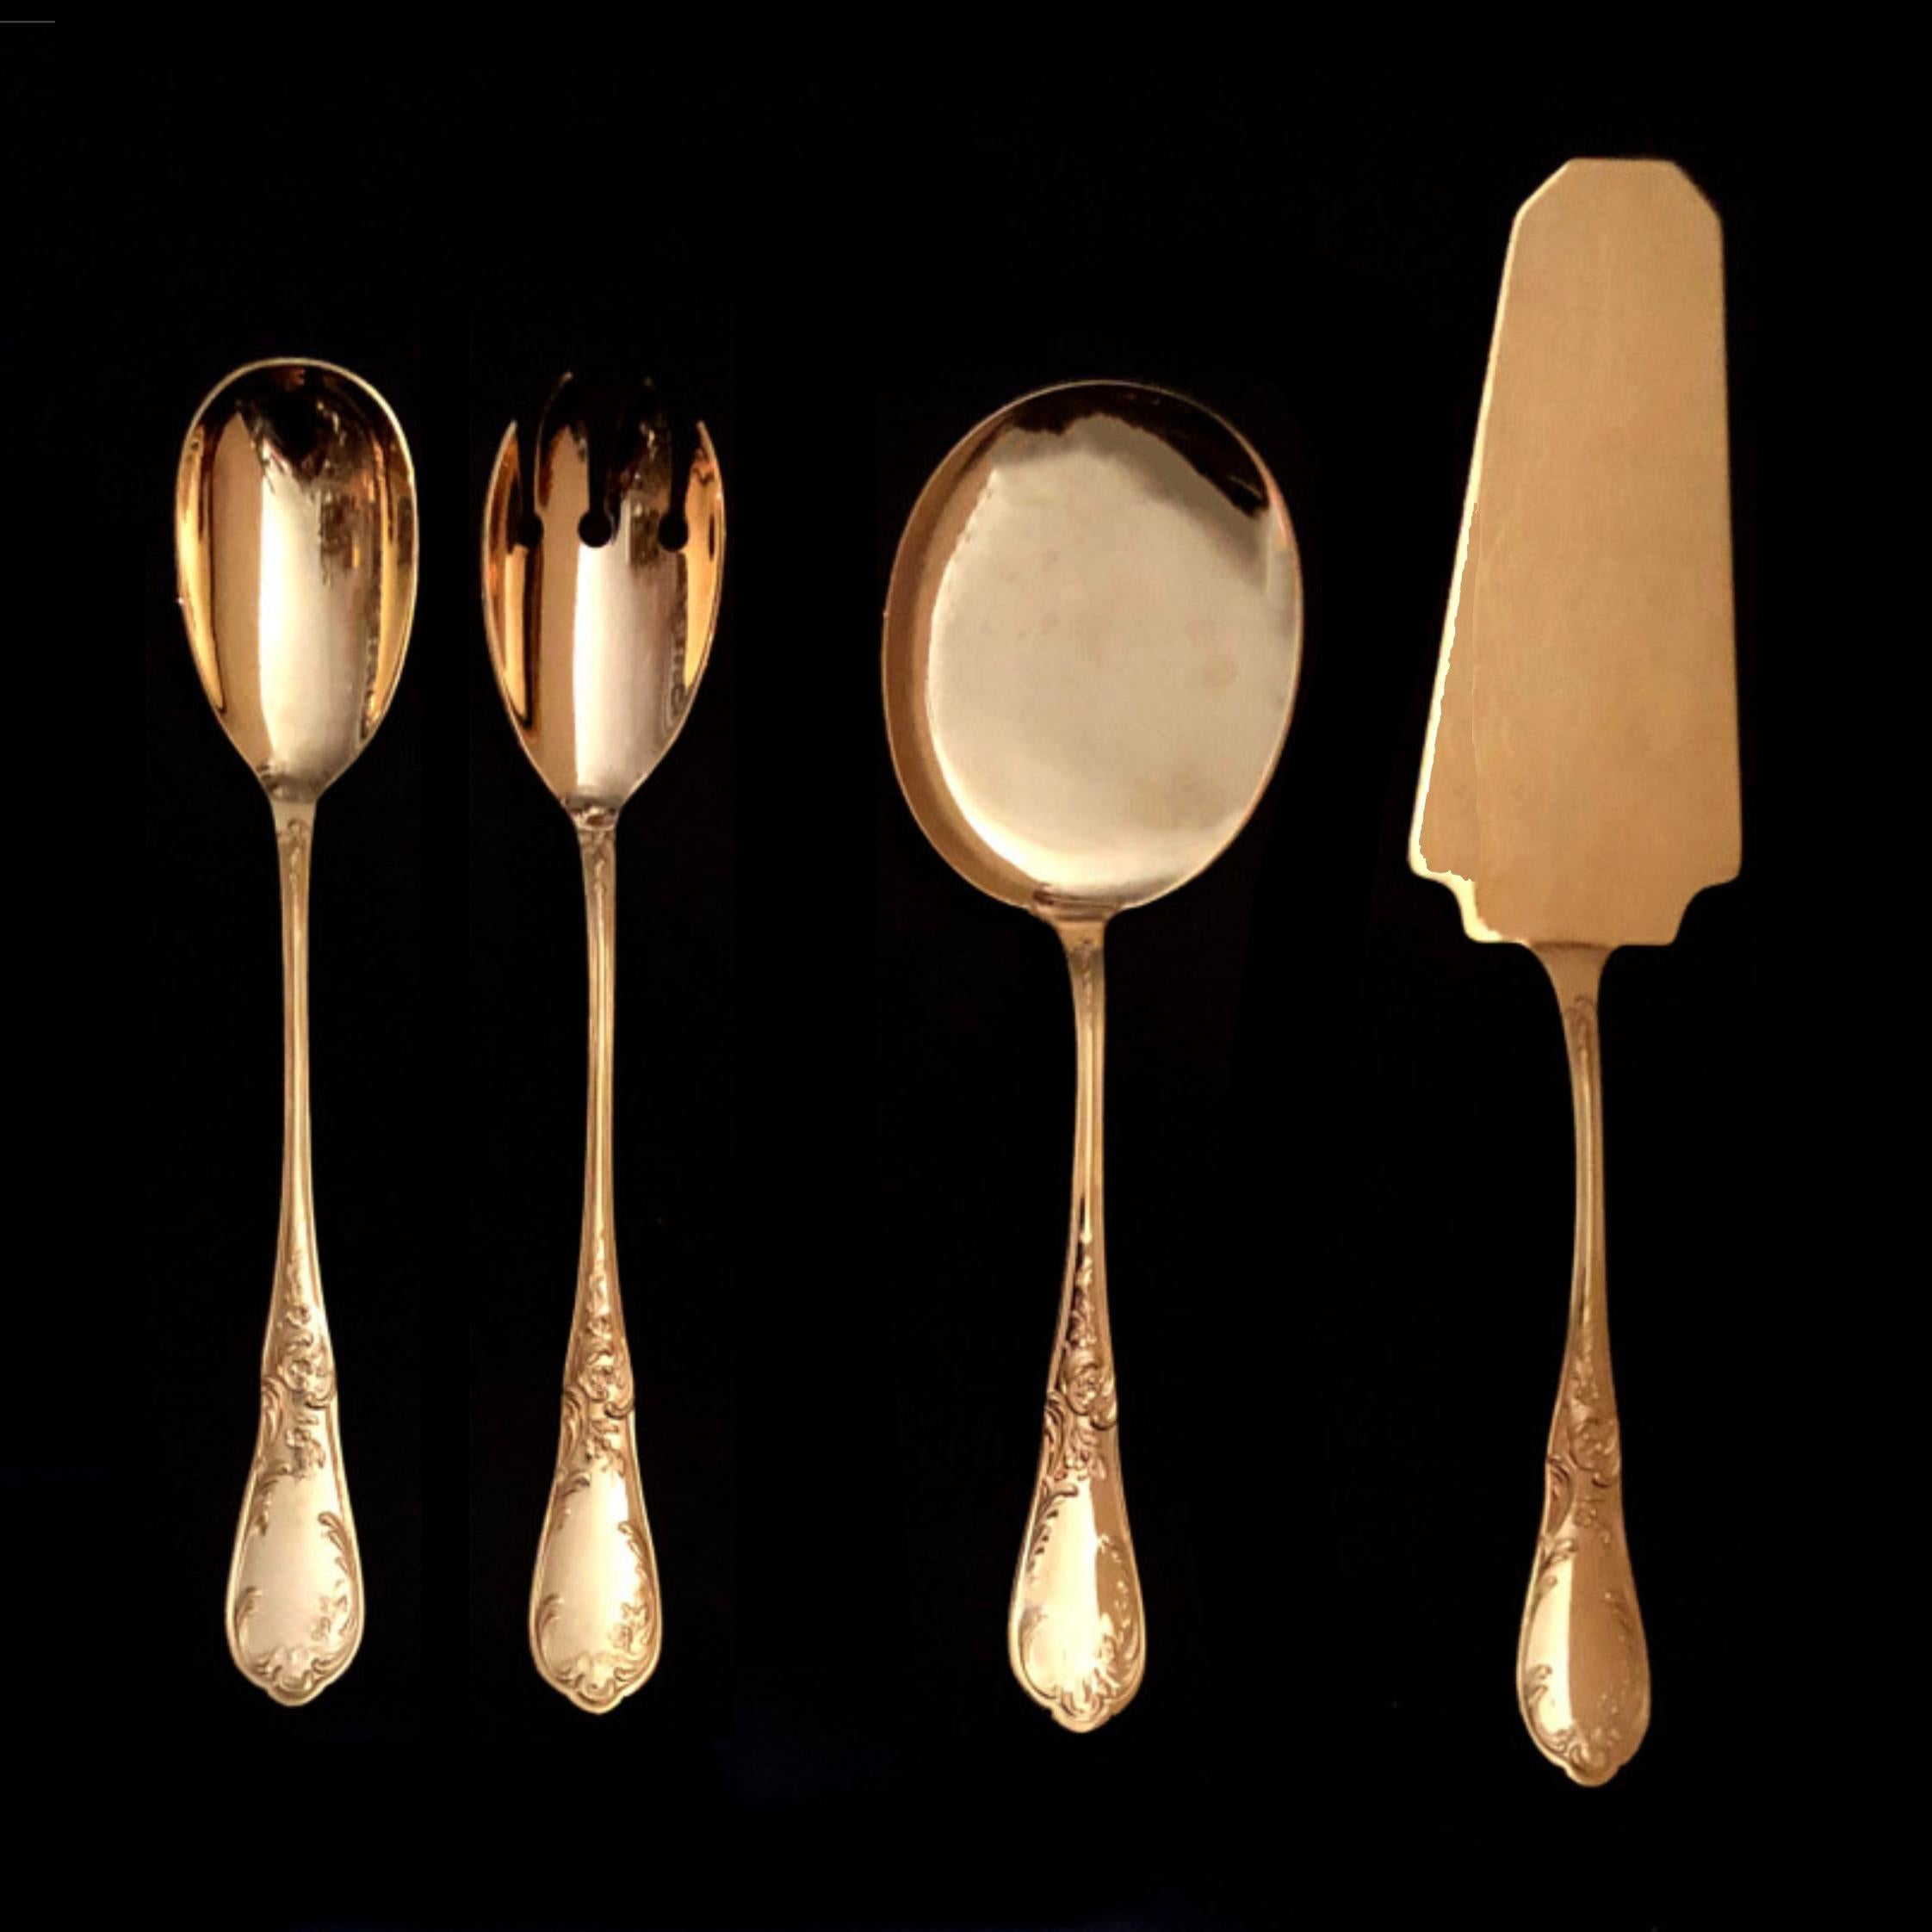 Silvered French Gilded Flatware Called 